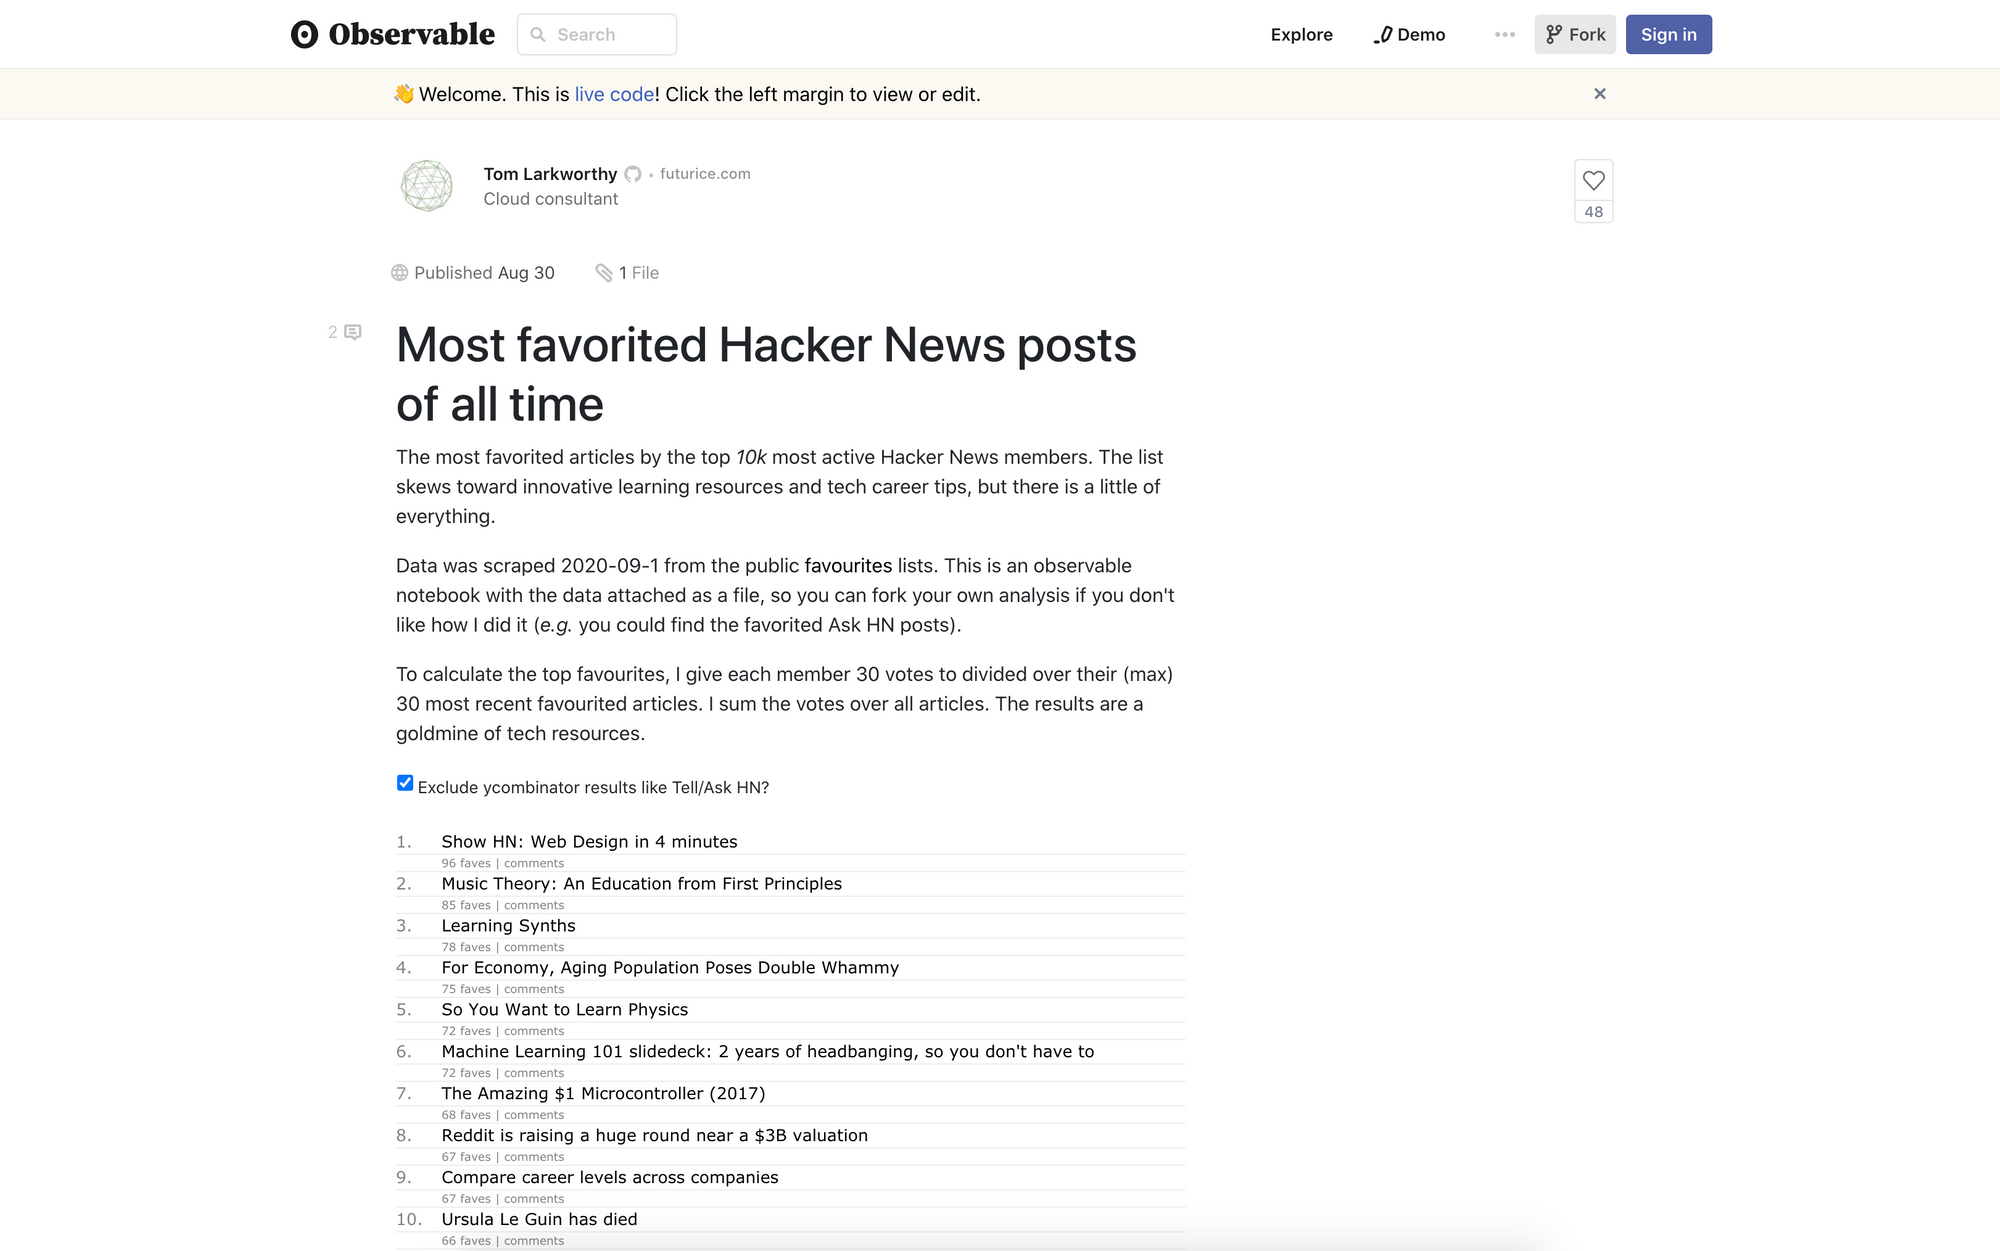 Hacking Hacker News frontpage with GPT-3